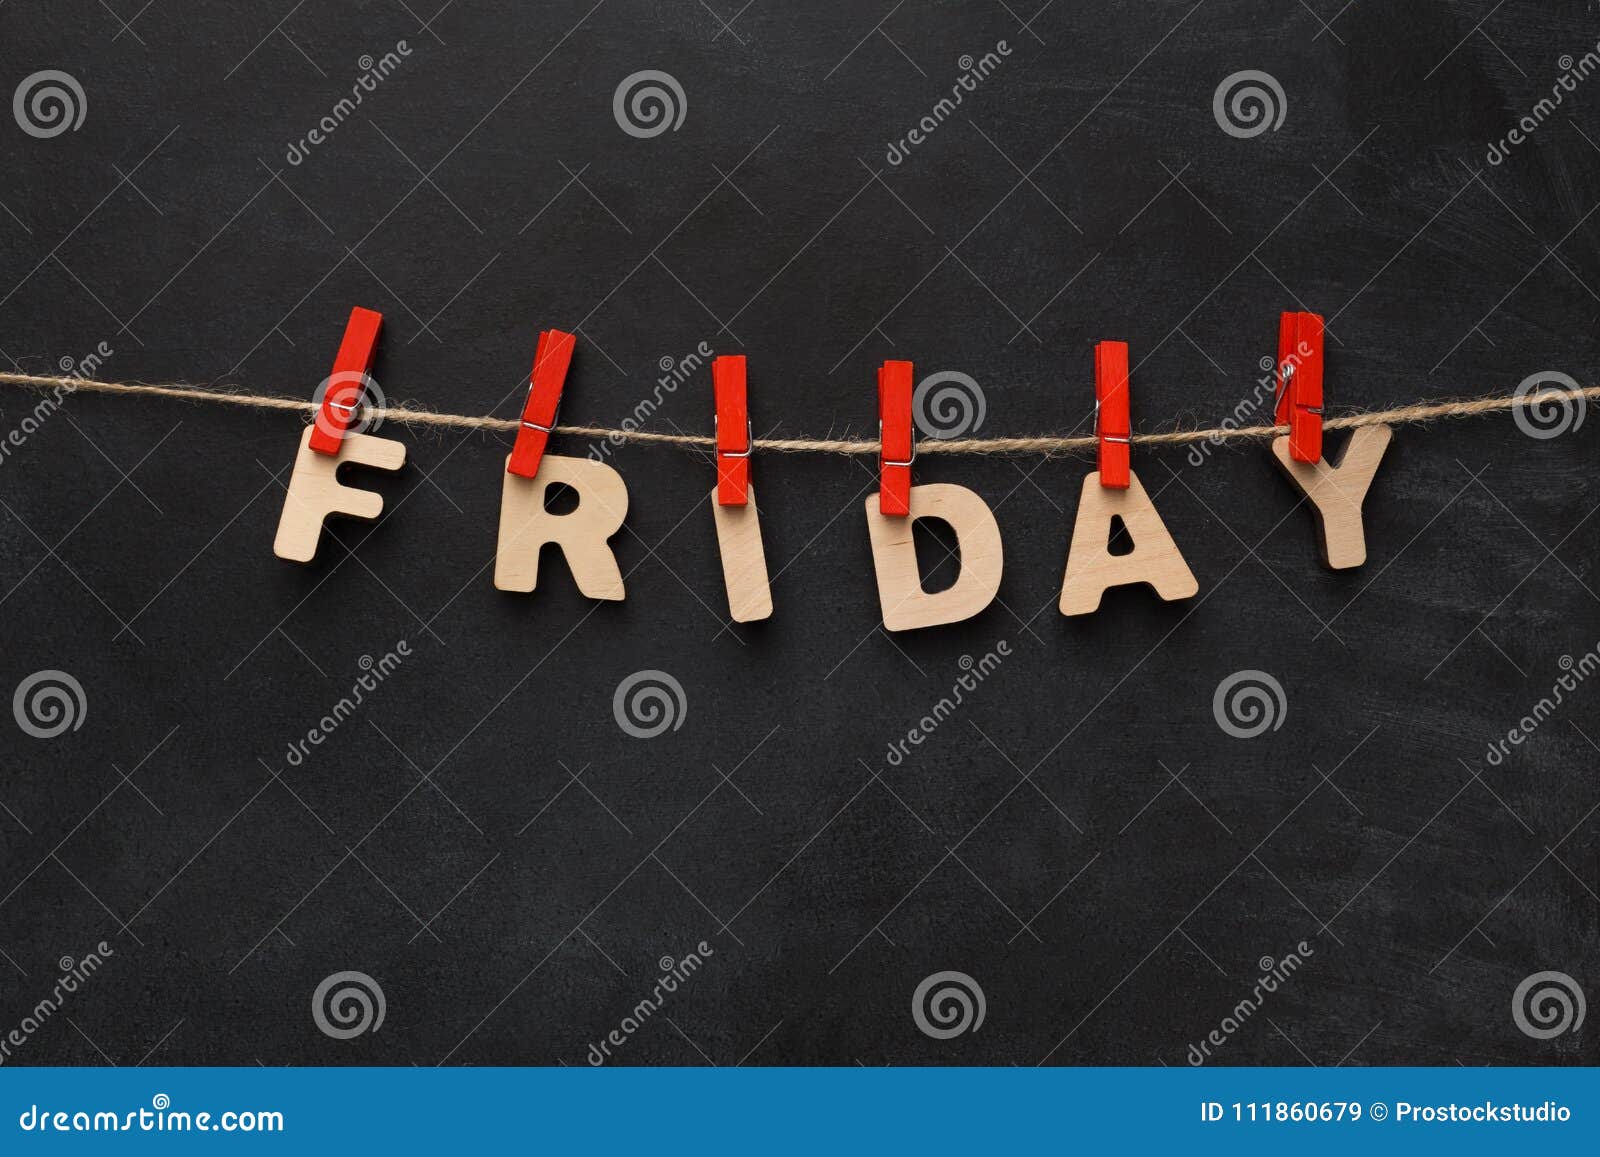 Friday Word Made of Wooden Letters Stock Image - Image of beginning ...